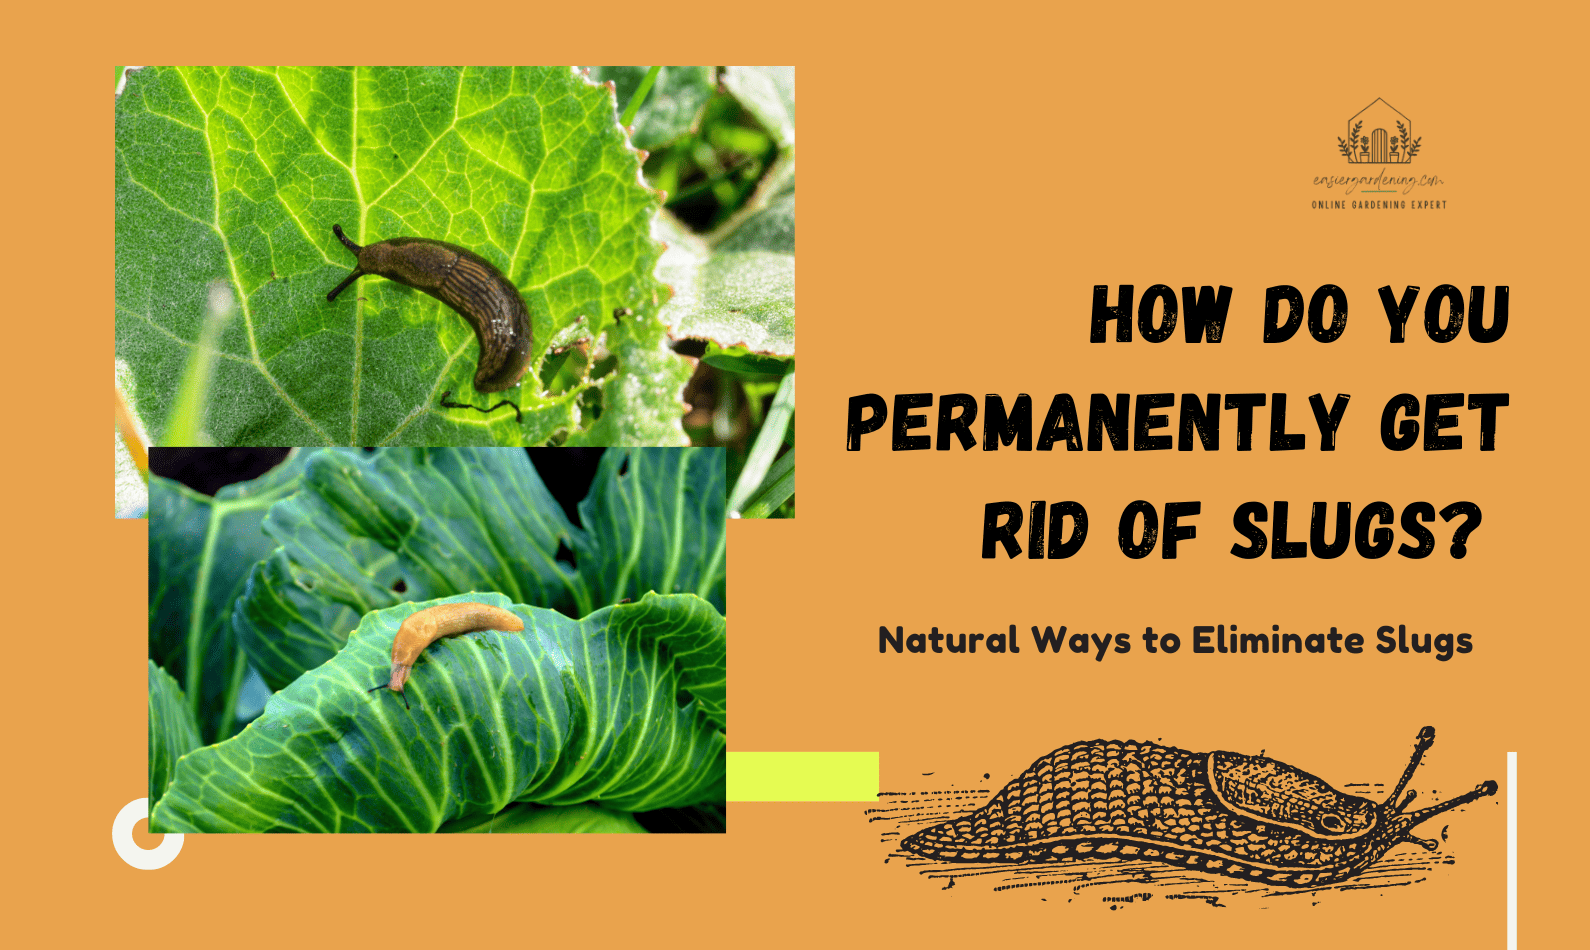 How Do You Permanently Get Rid of Slugs?